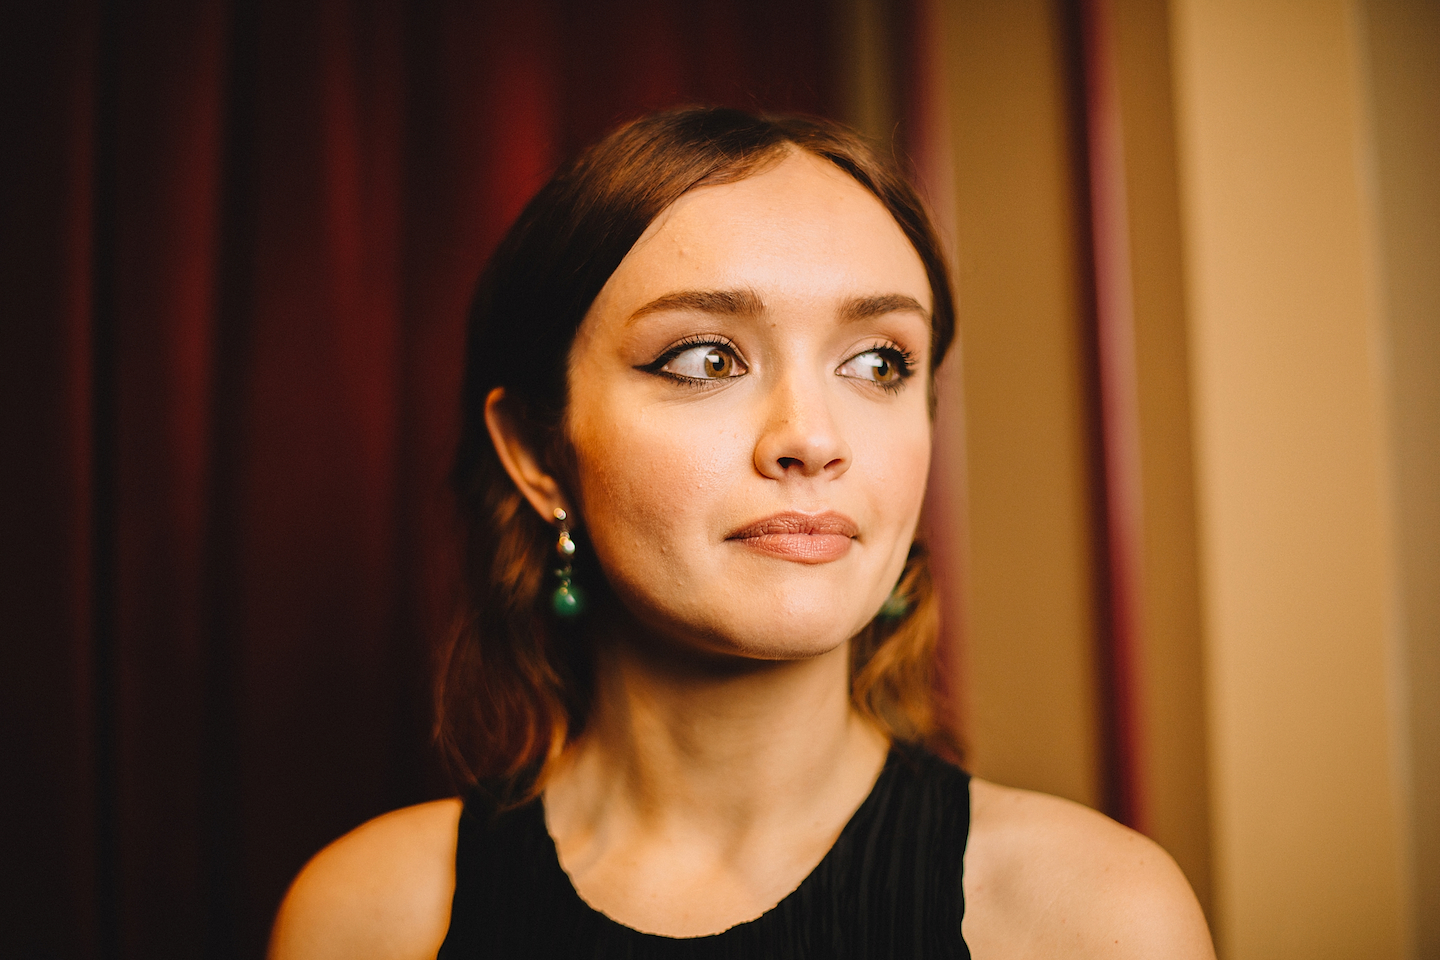 Olivia Cooke. Photo by Matt Winkelmeyer/Contour by Getty Images for SXSW